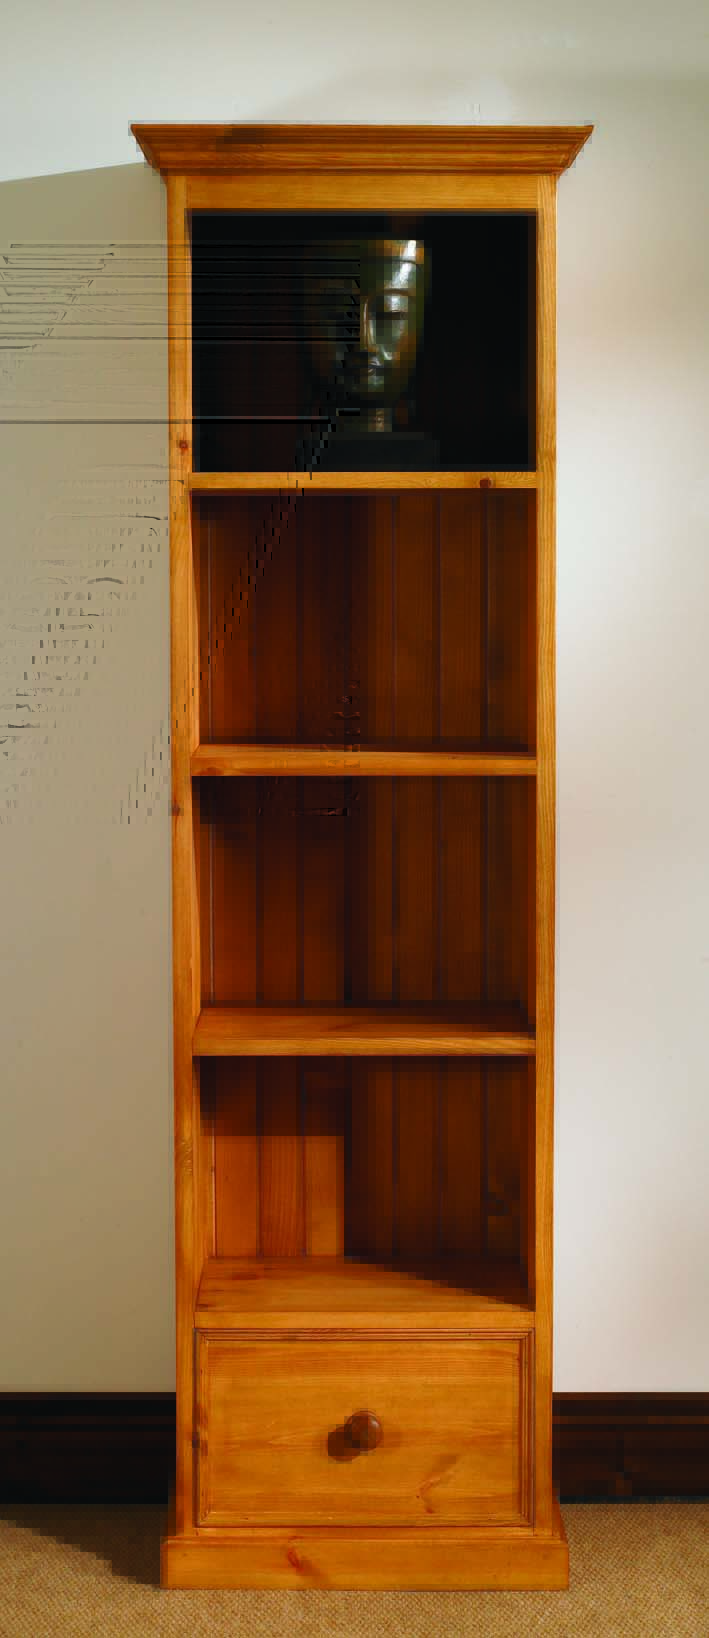 Mottisfont Painted Pine Slim Bookcase - Click Image to Close